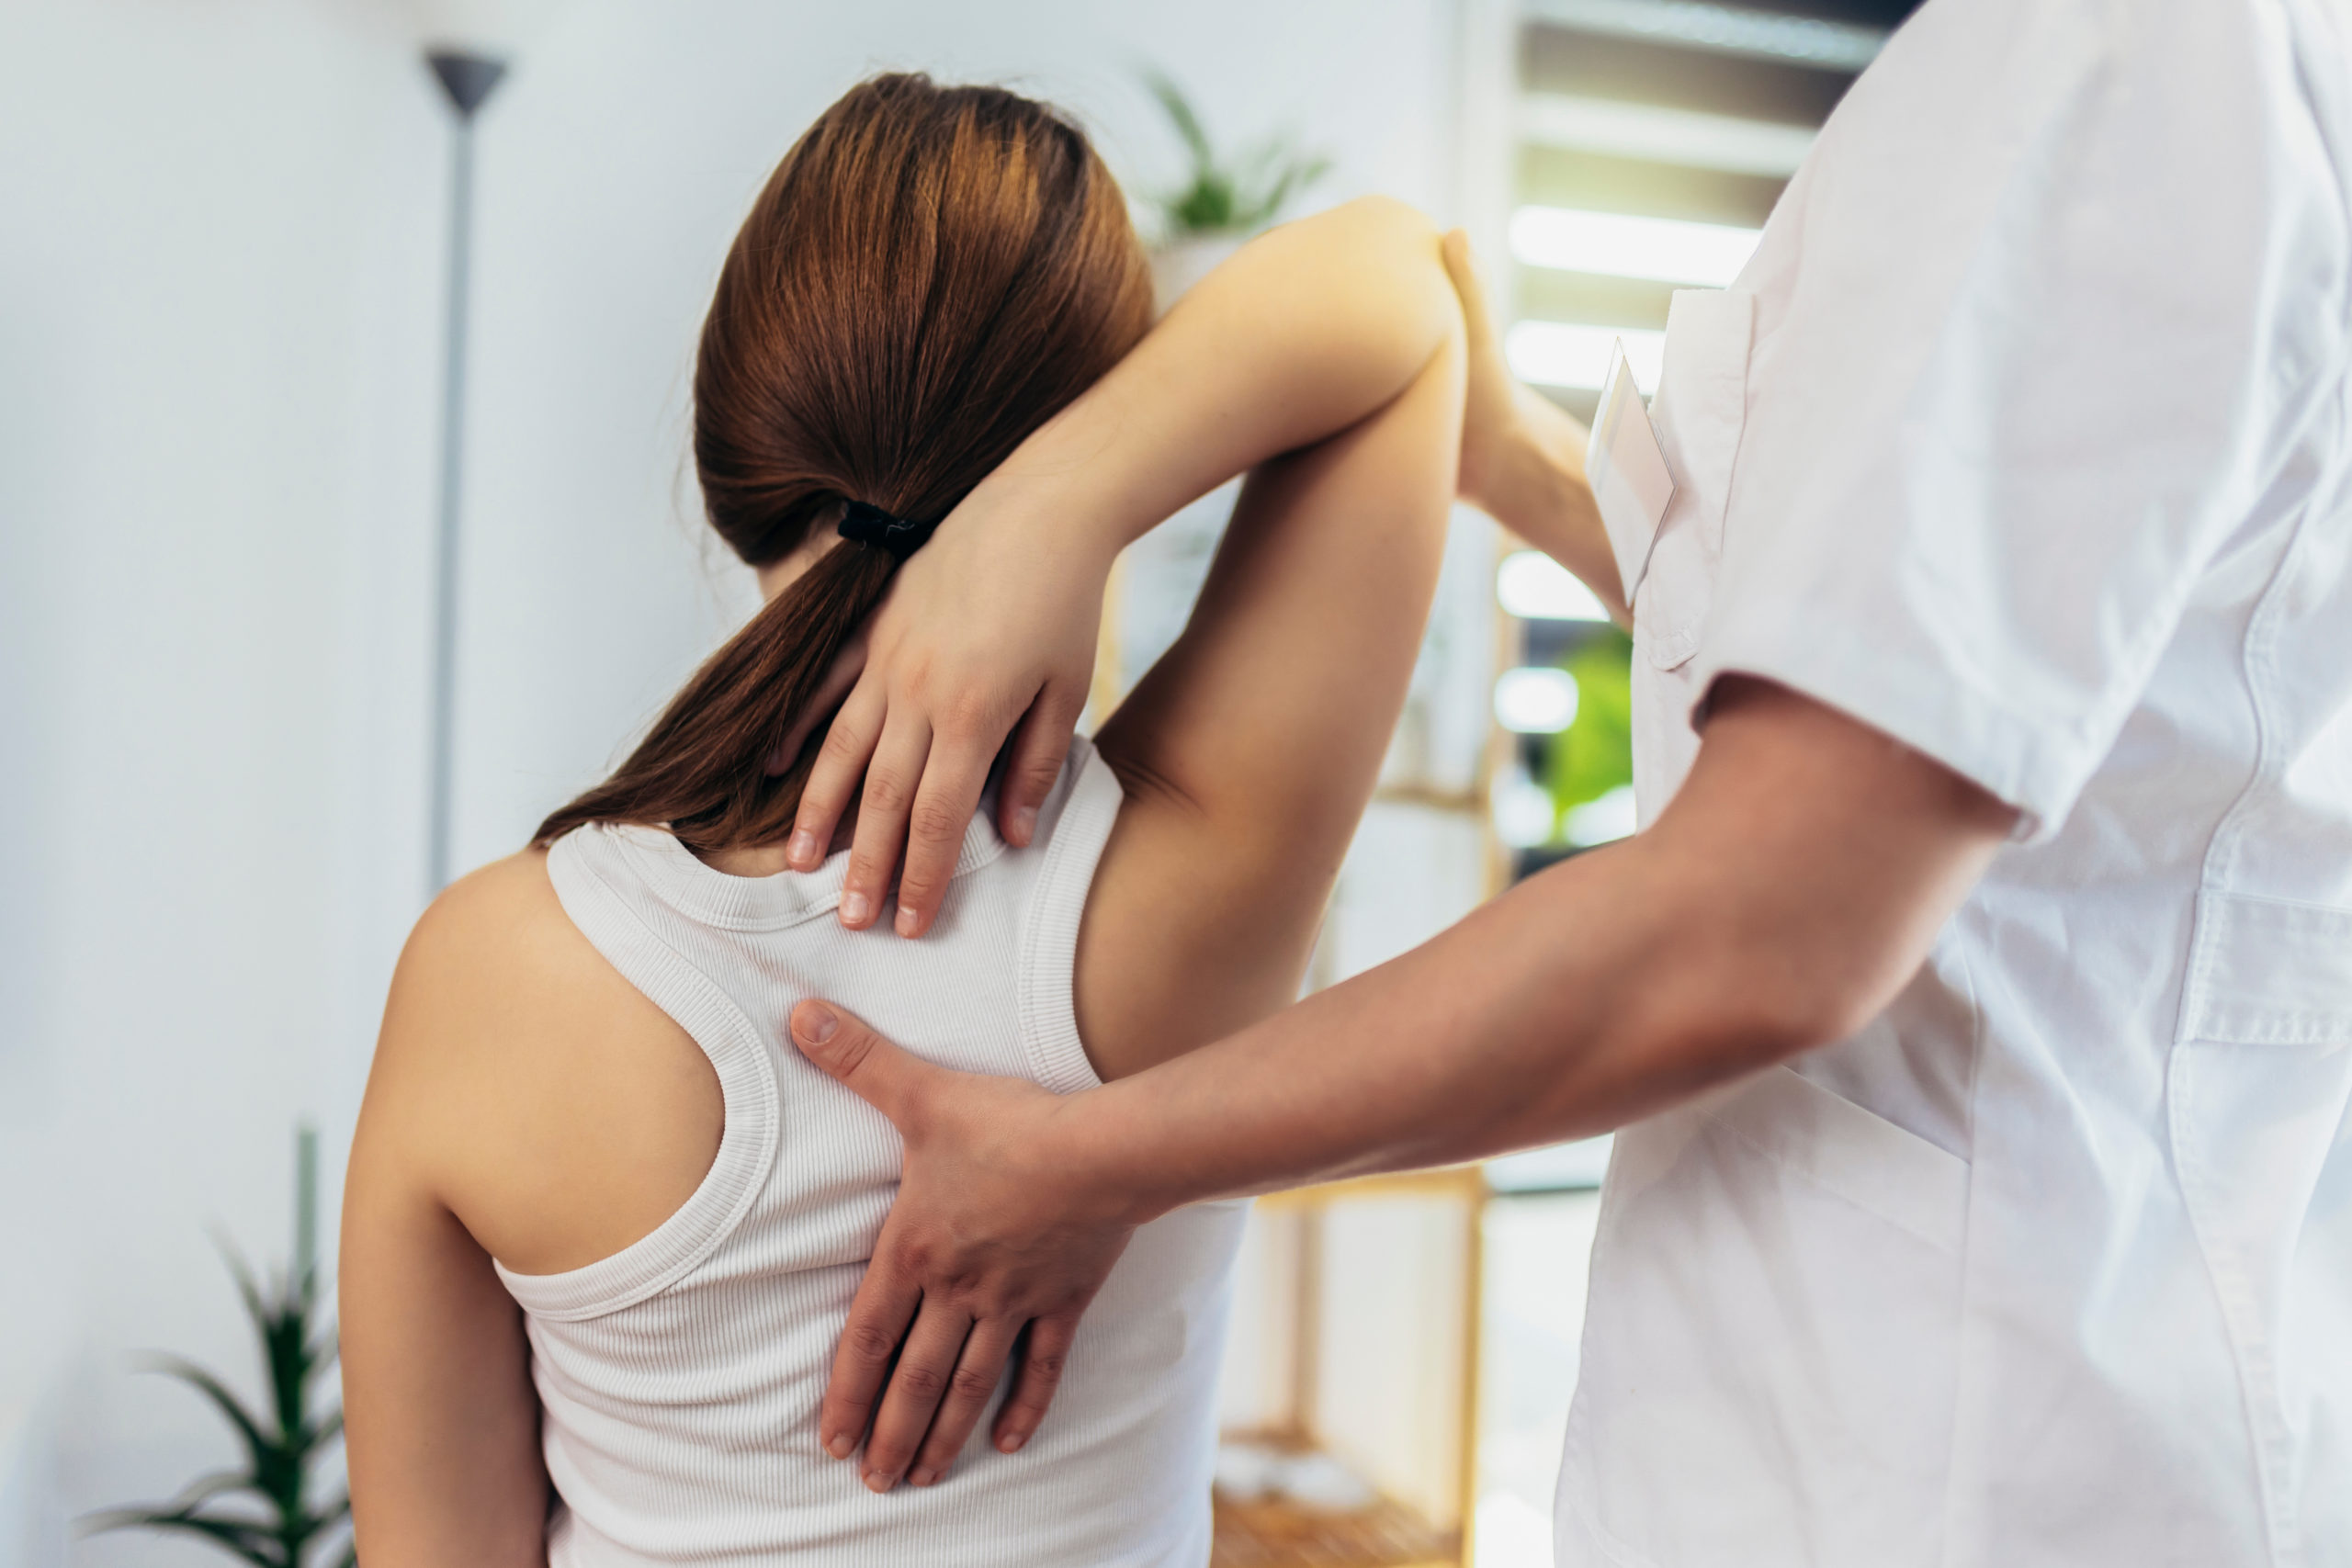 What Is Pain Management? Relief for Back, Knee Pain, Etc